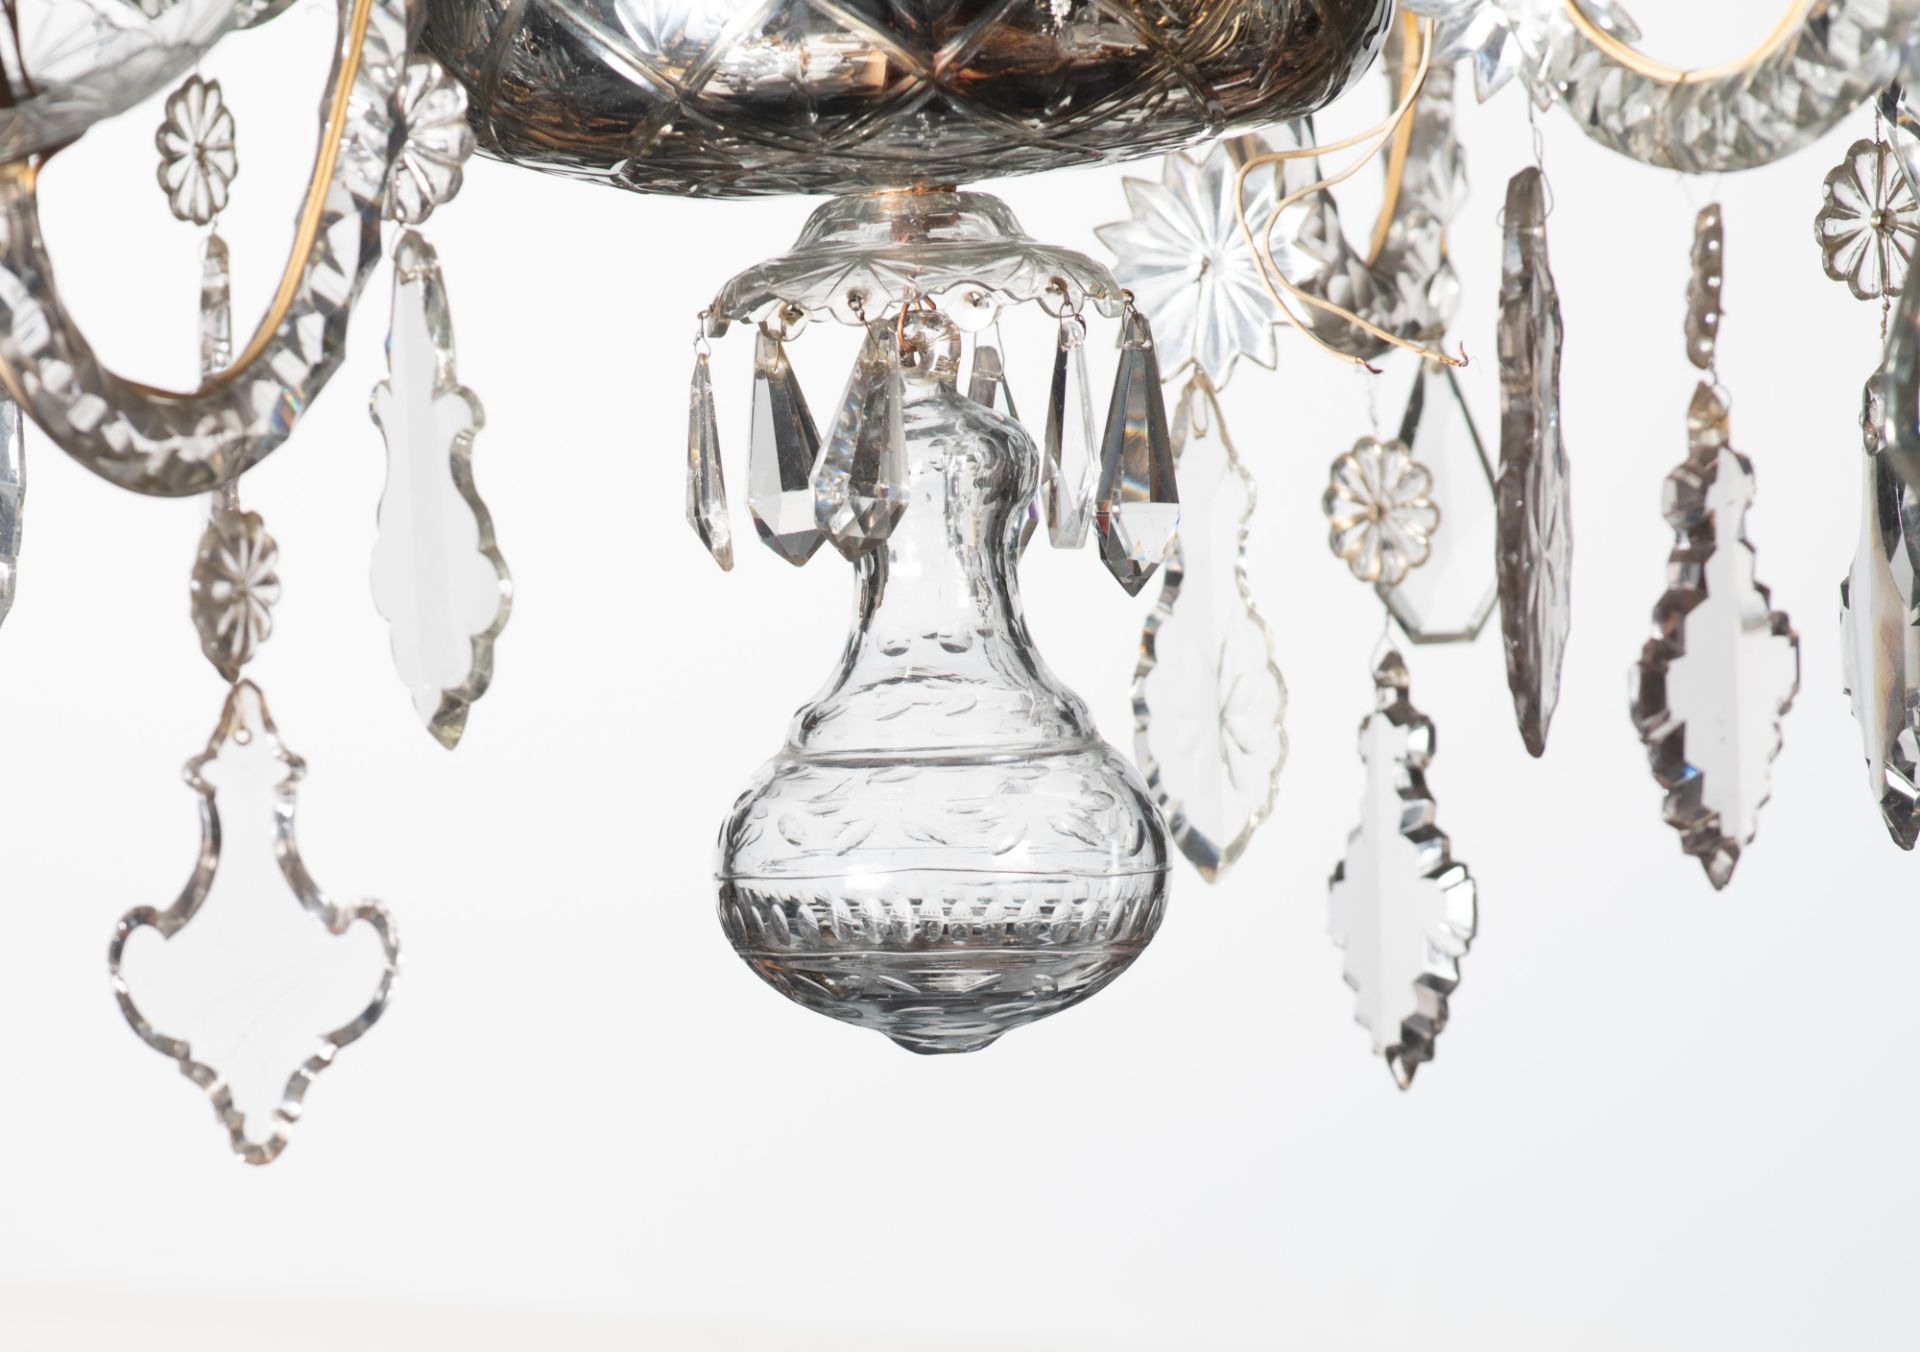 An imposing six-armed Venetian type glass chandelier, H 80 - › 107 cm, - Image 5 of 6